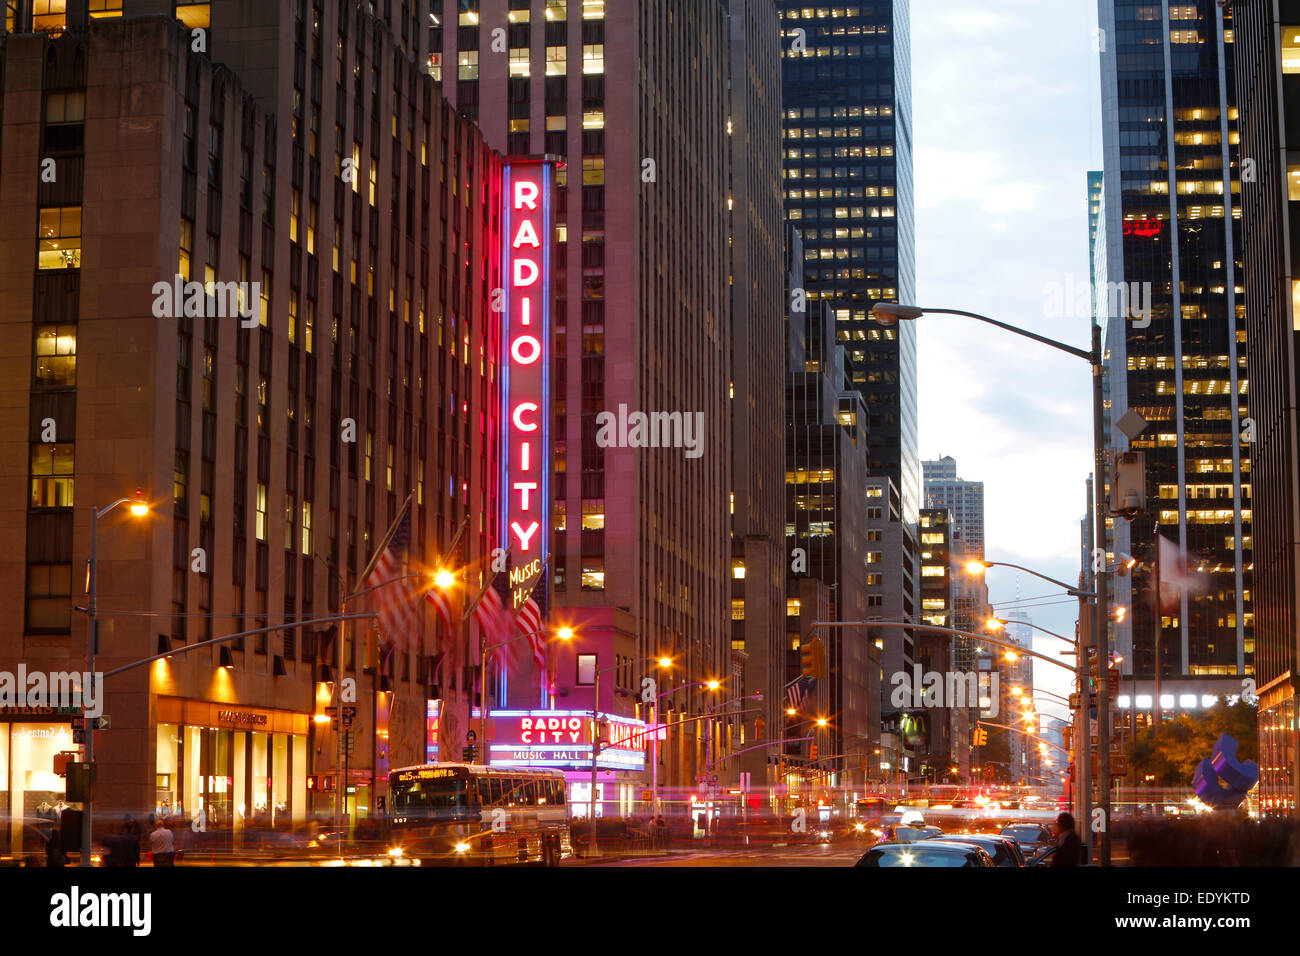 Radio City Music Hall, 1260 Avenue of the Americas, New York City, New York, United States Banque D'Images